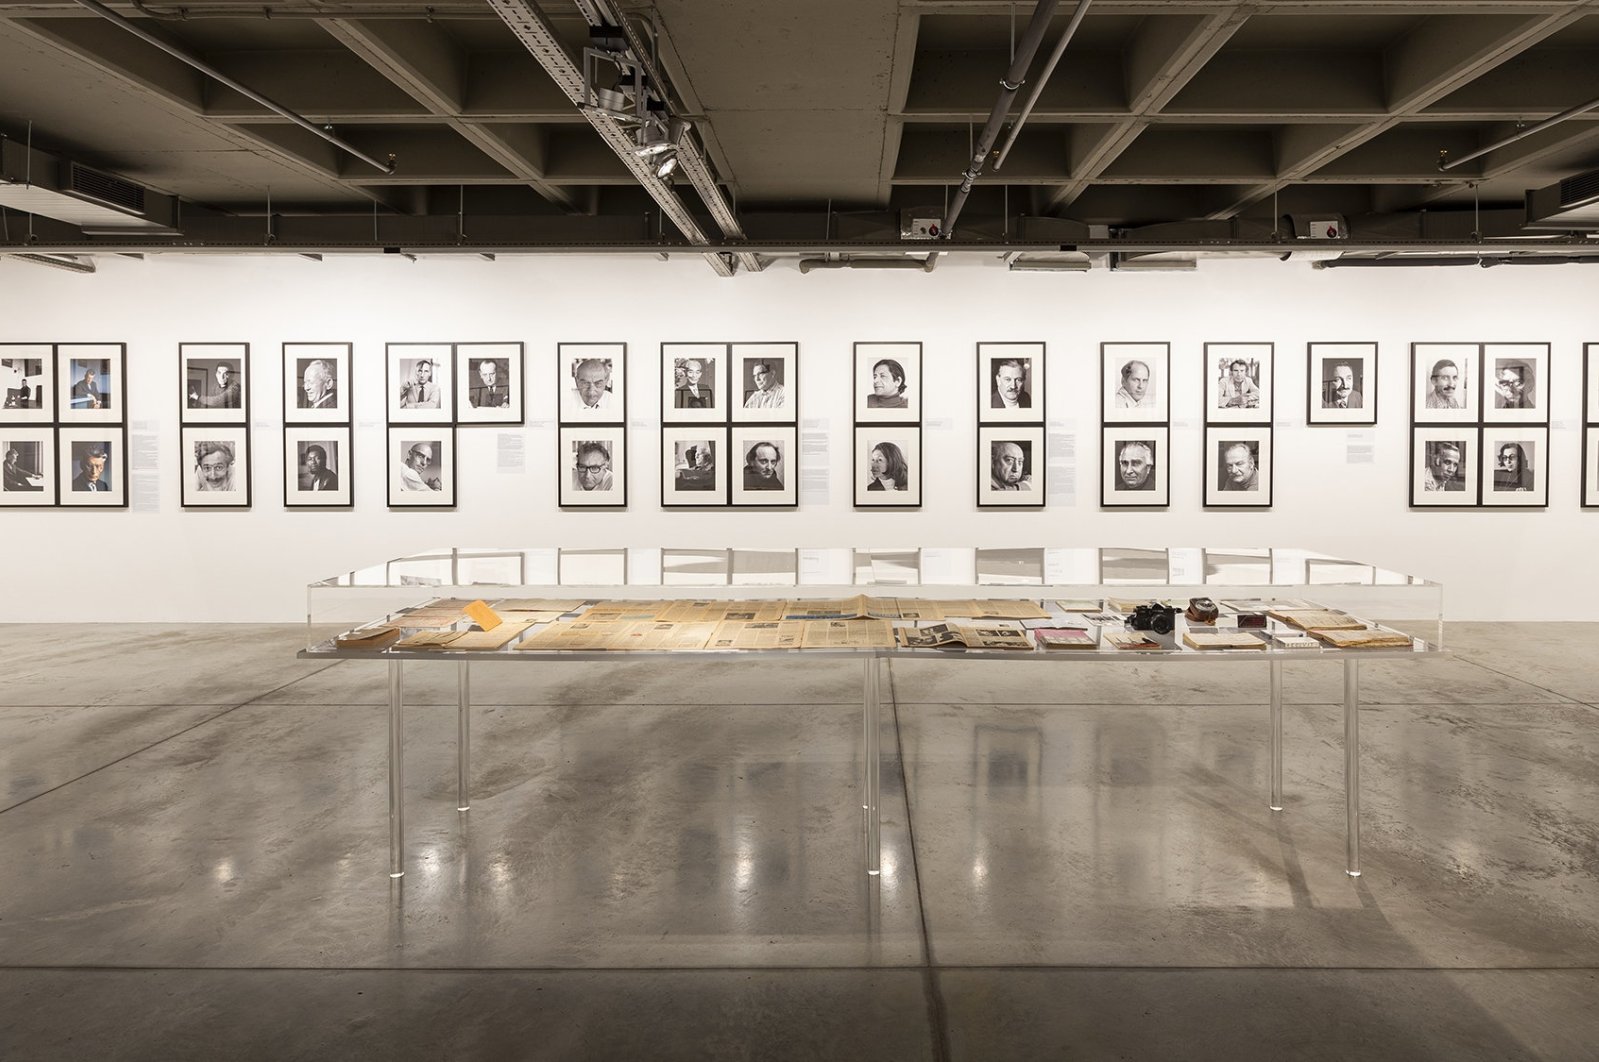 A collection of portrait photographs by Lütfi Özkök is on show at Istanbul Modern. (Courtesy of Istanbul Modern)